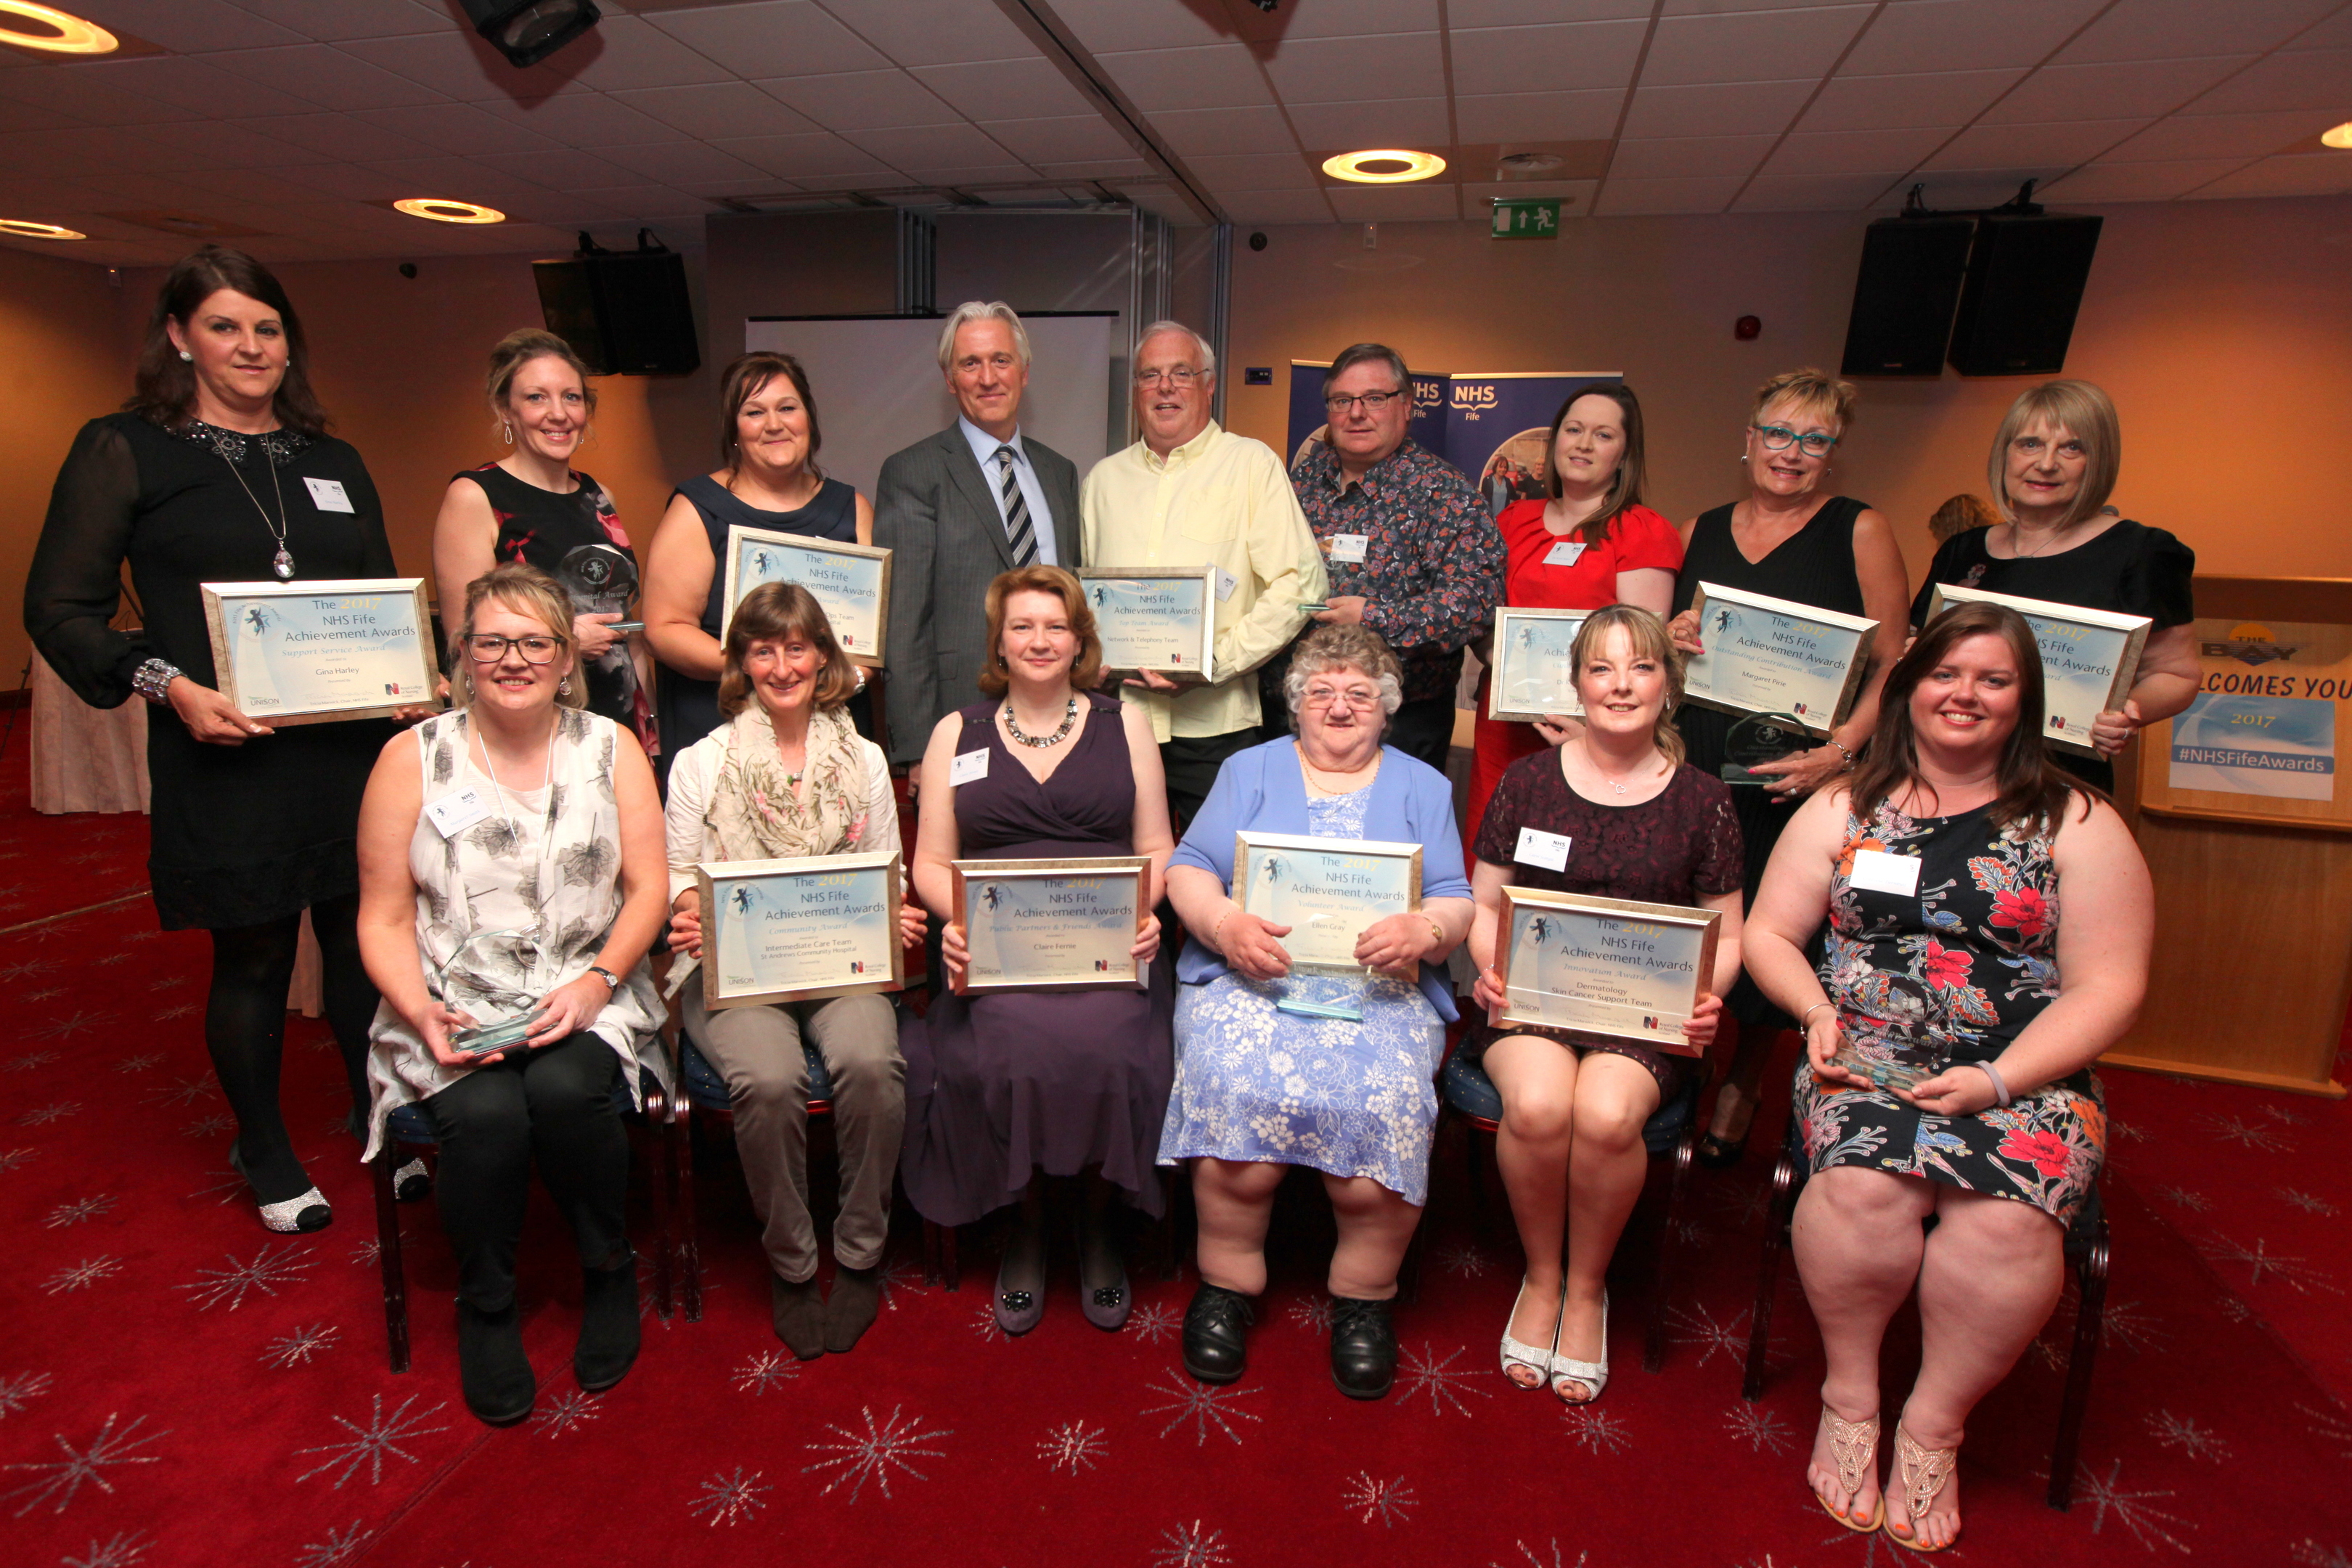 Some of the NHS award winners